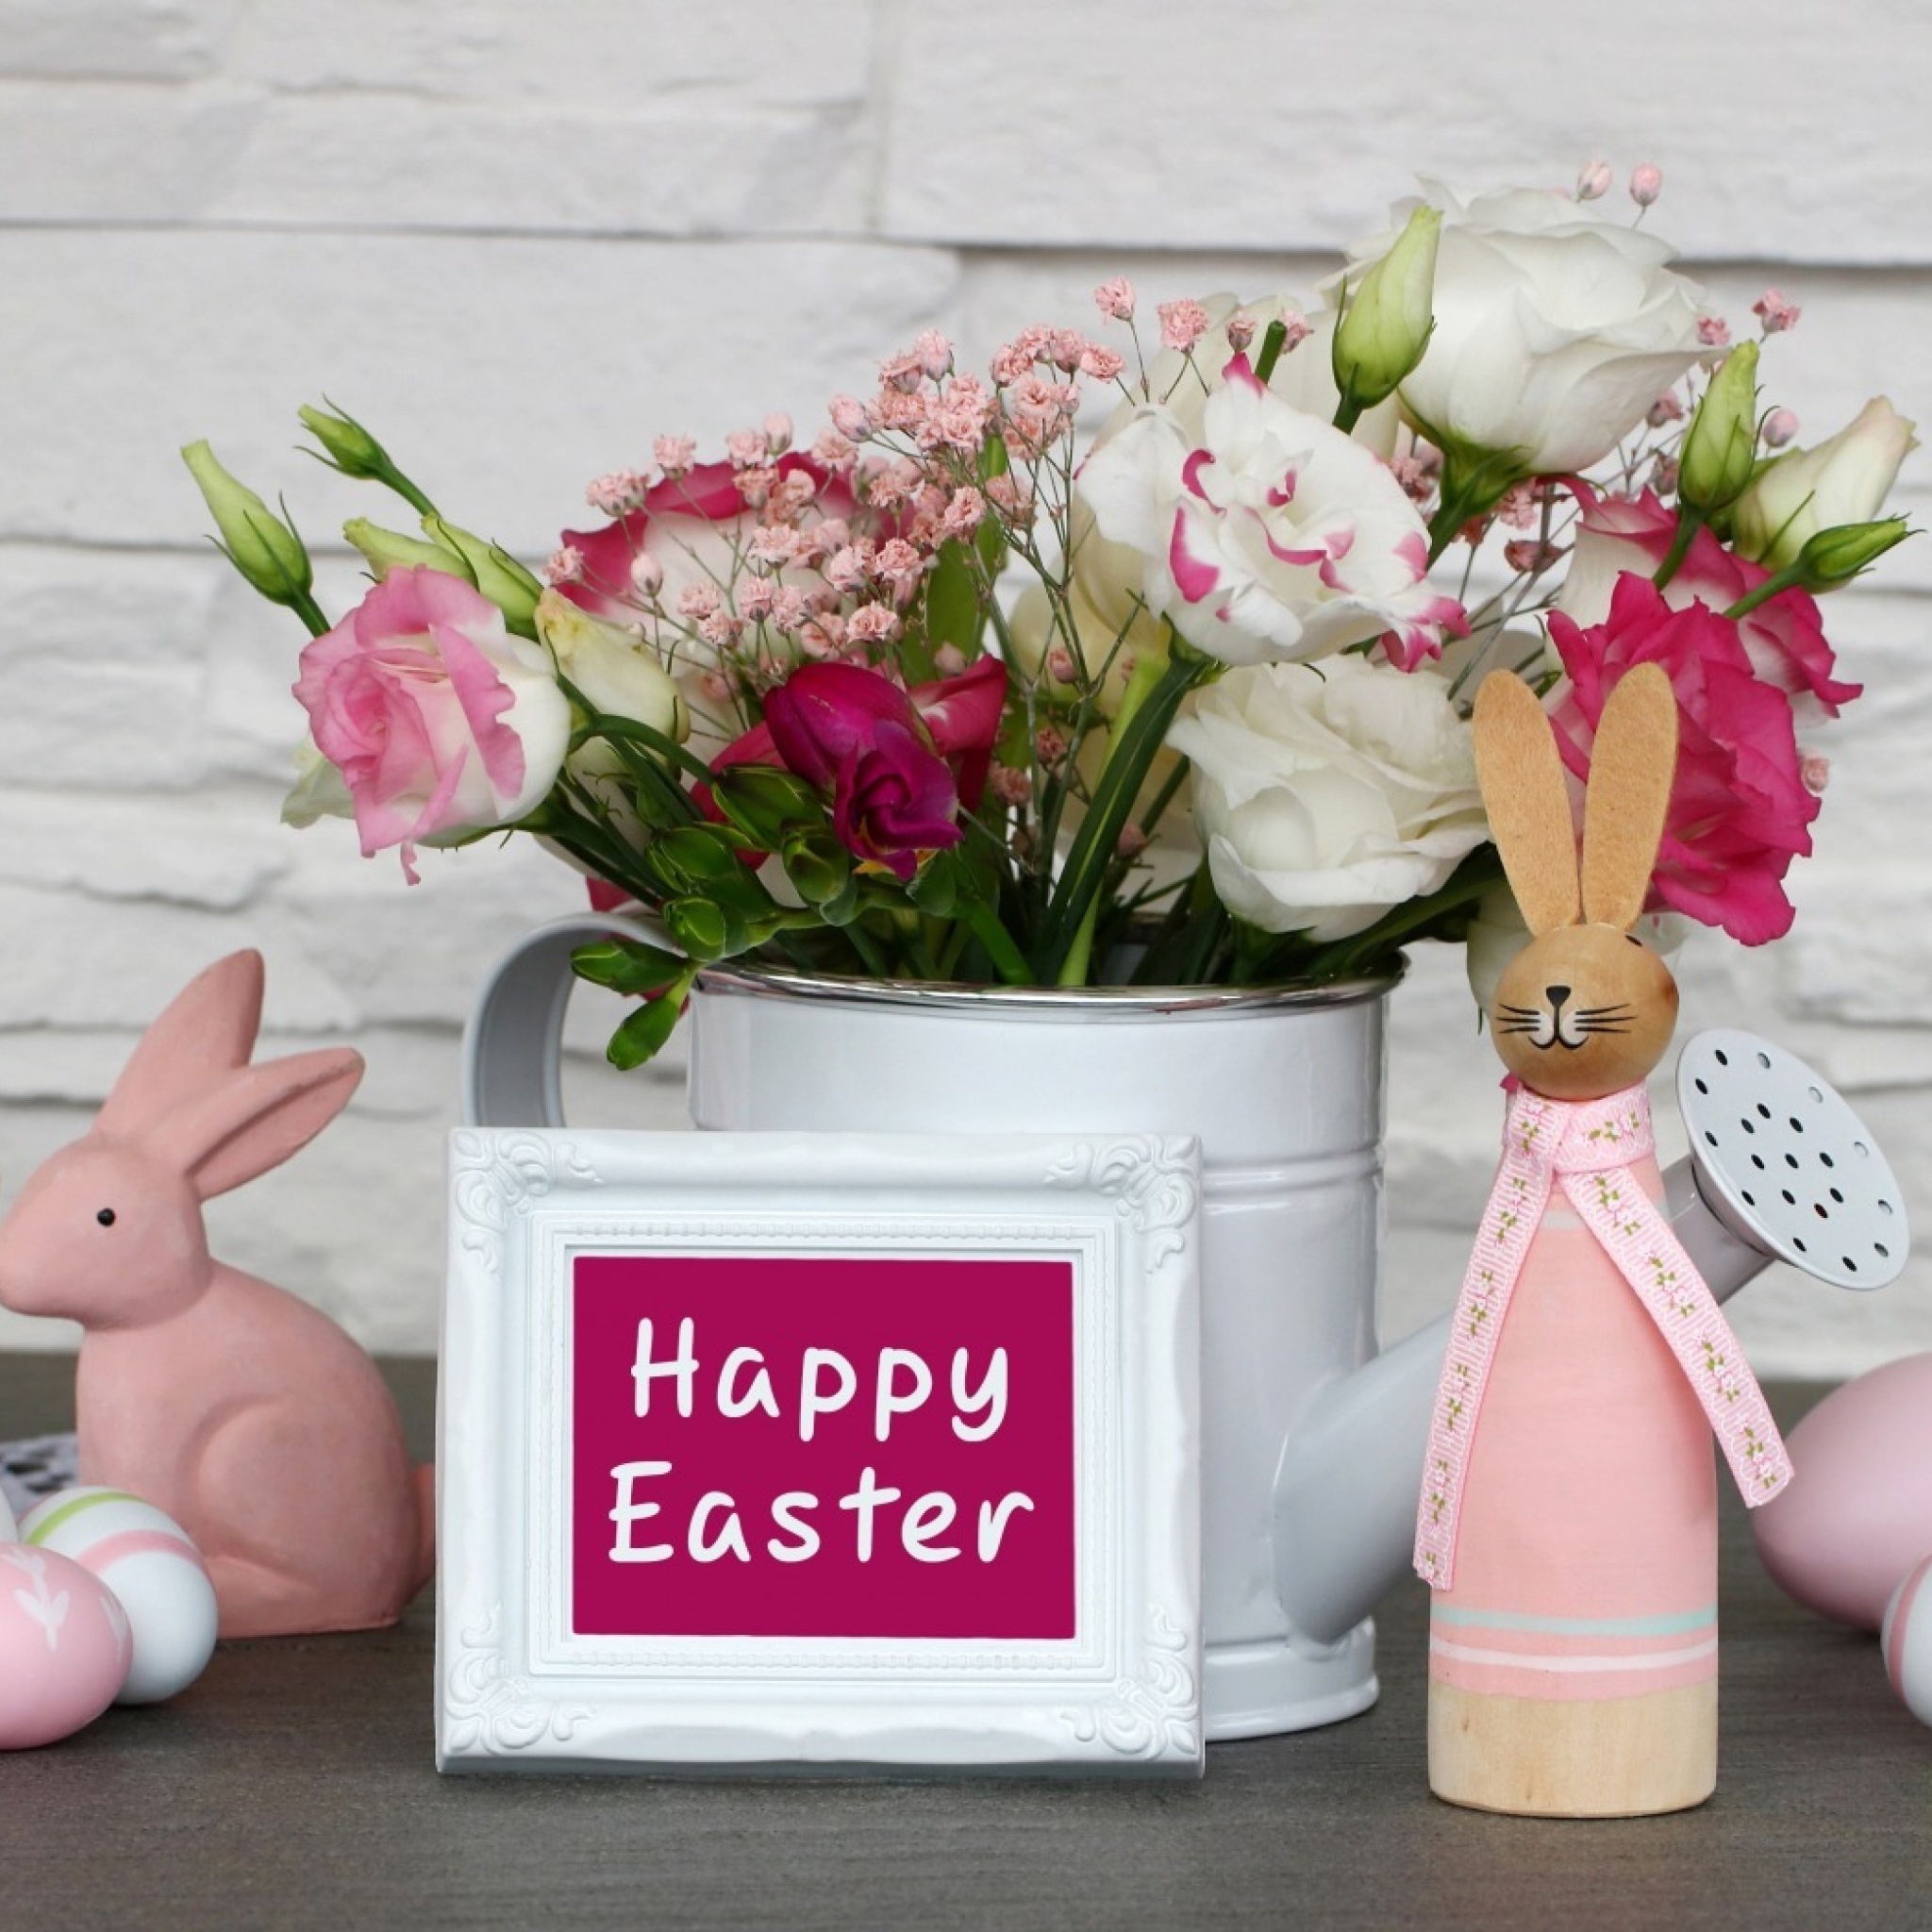 Happy Easter with Hare Figures wallpaper 2048x2048